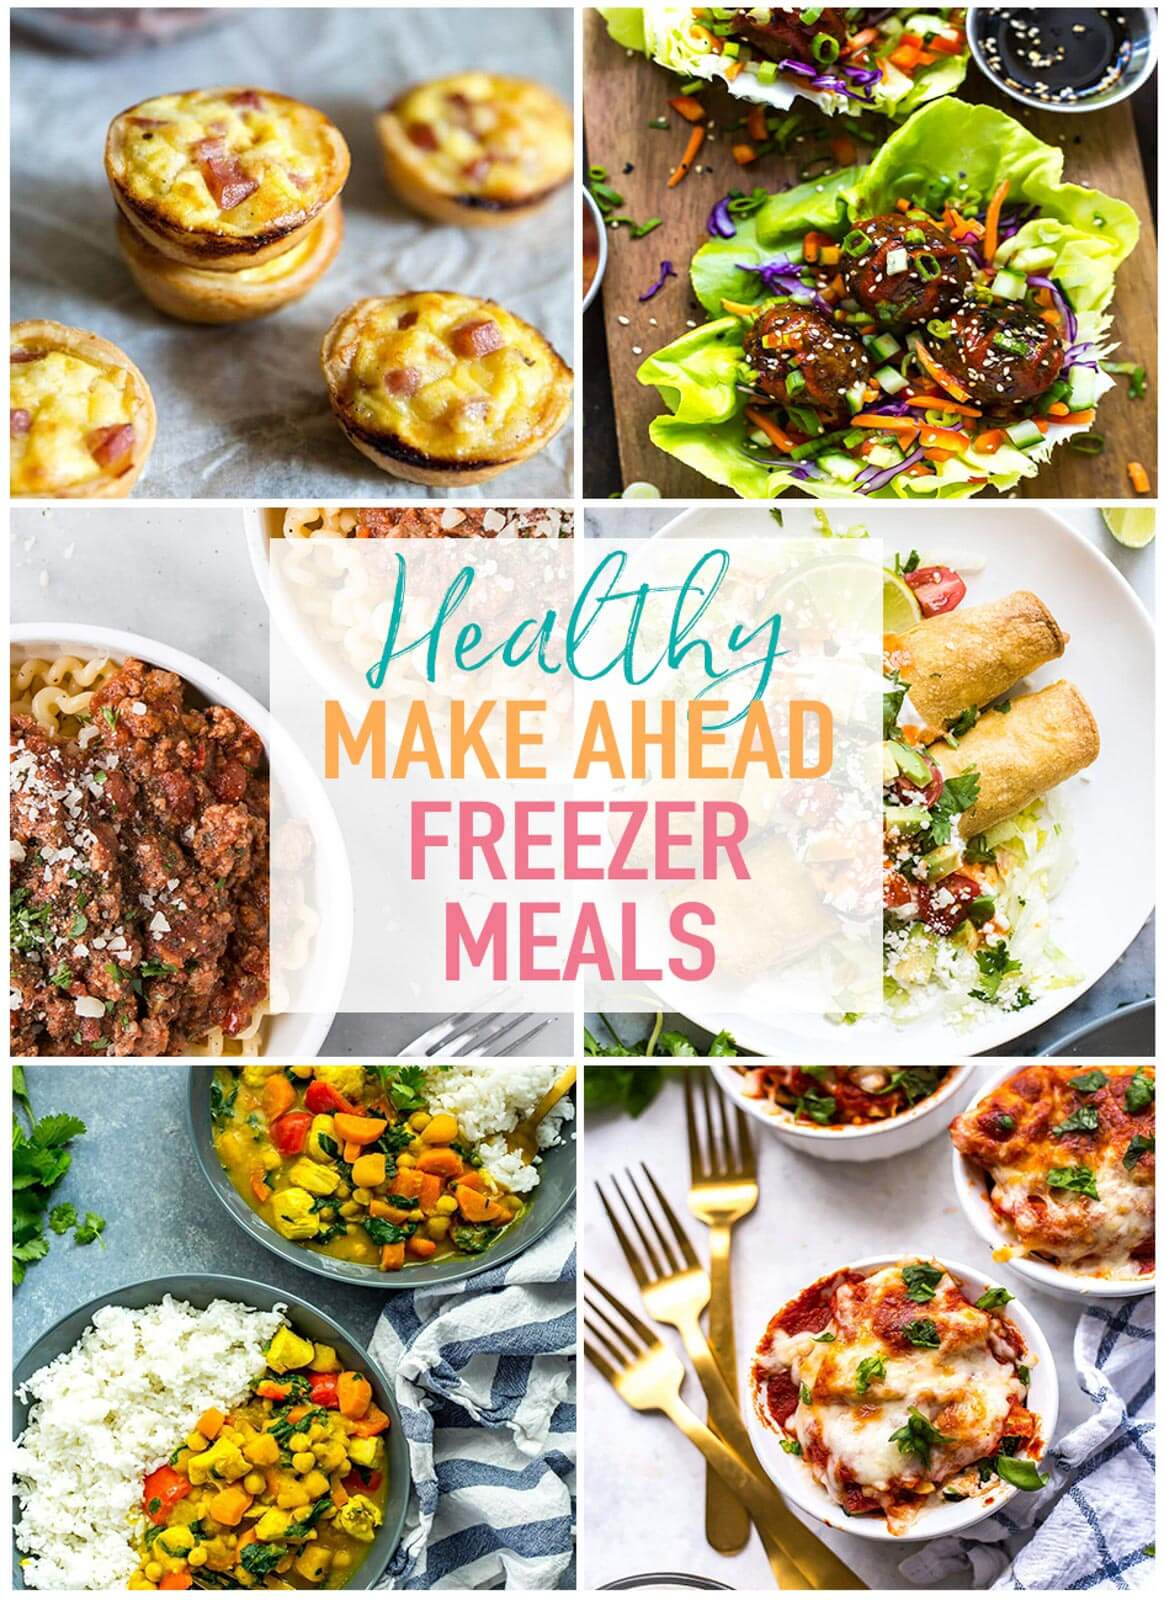 Make Ahead Dinner
 21 Healthy Make Ahead Freezer Meals for Busy Weeknights